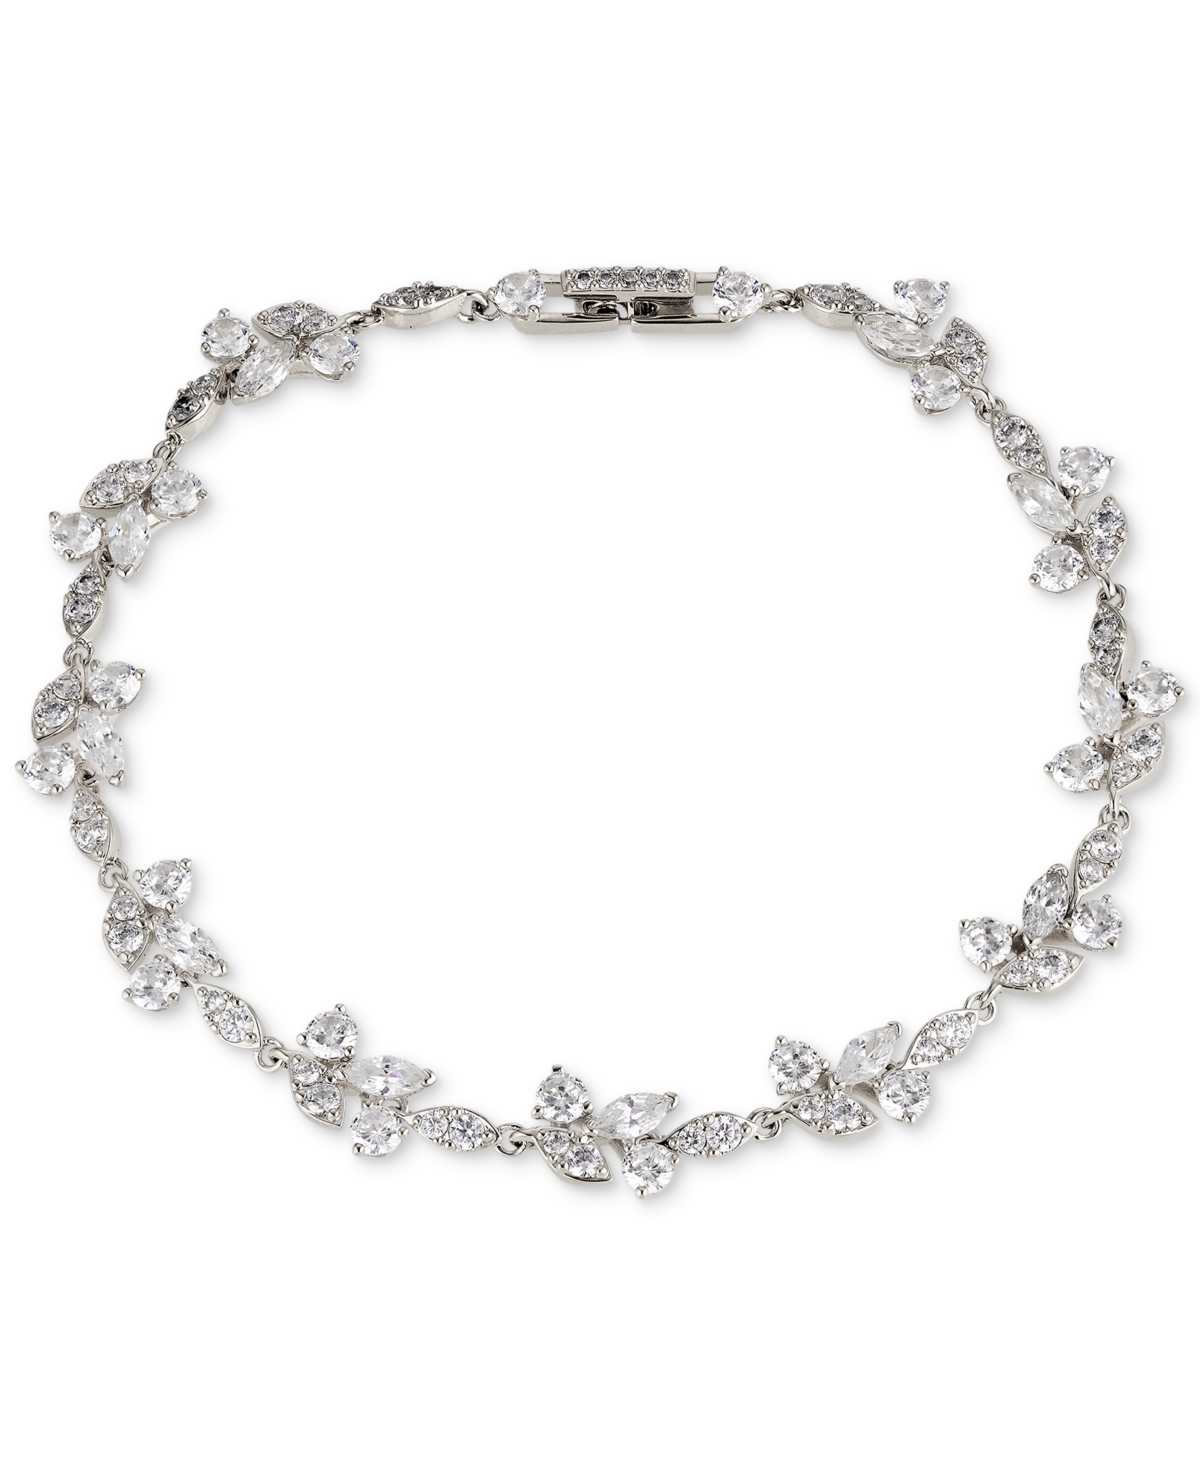 Silver-Tone Crystal Line Bracelet, Created for Macy's - Silver